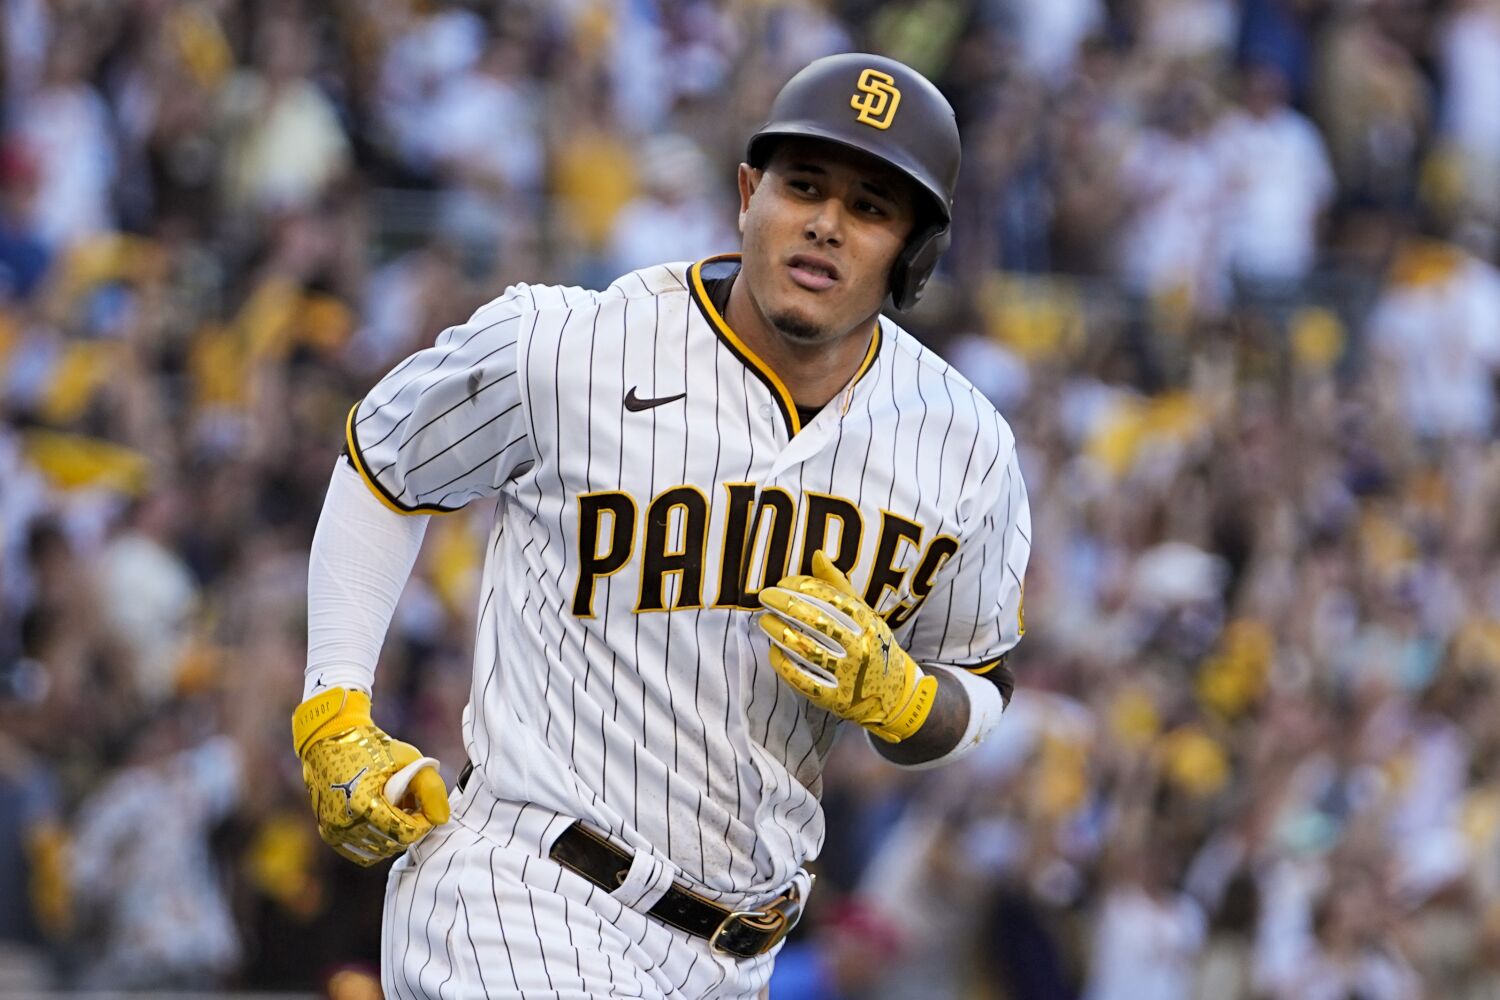 If Manny Machado reaches free agency again, is a Dodgers reunion possible?